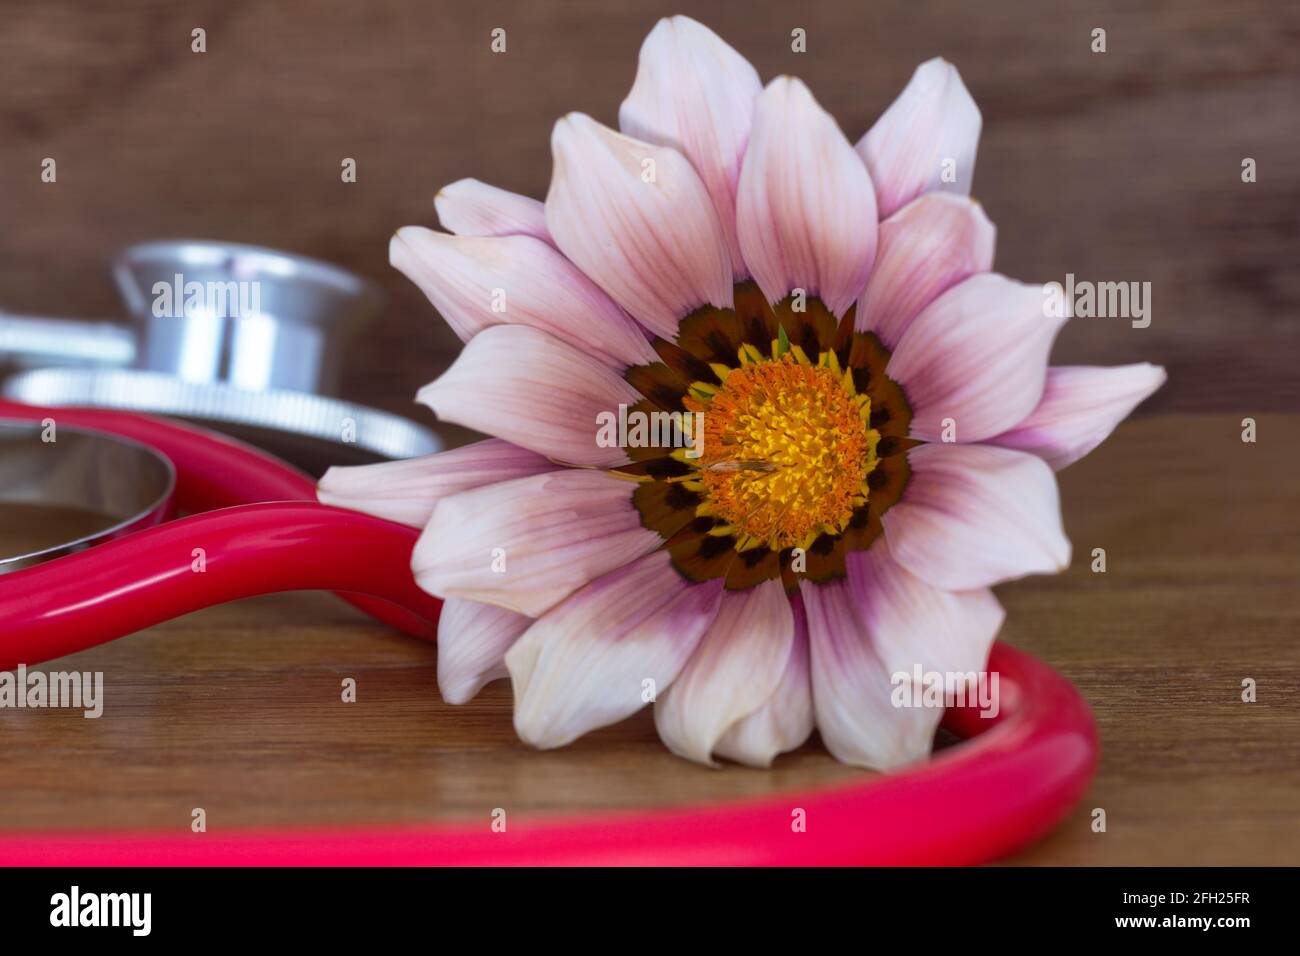 Close up healthcare conceptual image of natural, integrative medicine with fresh pink daisy placed with red stethoscope on wood grain background Stock Photo